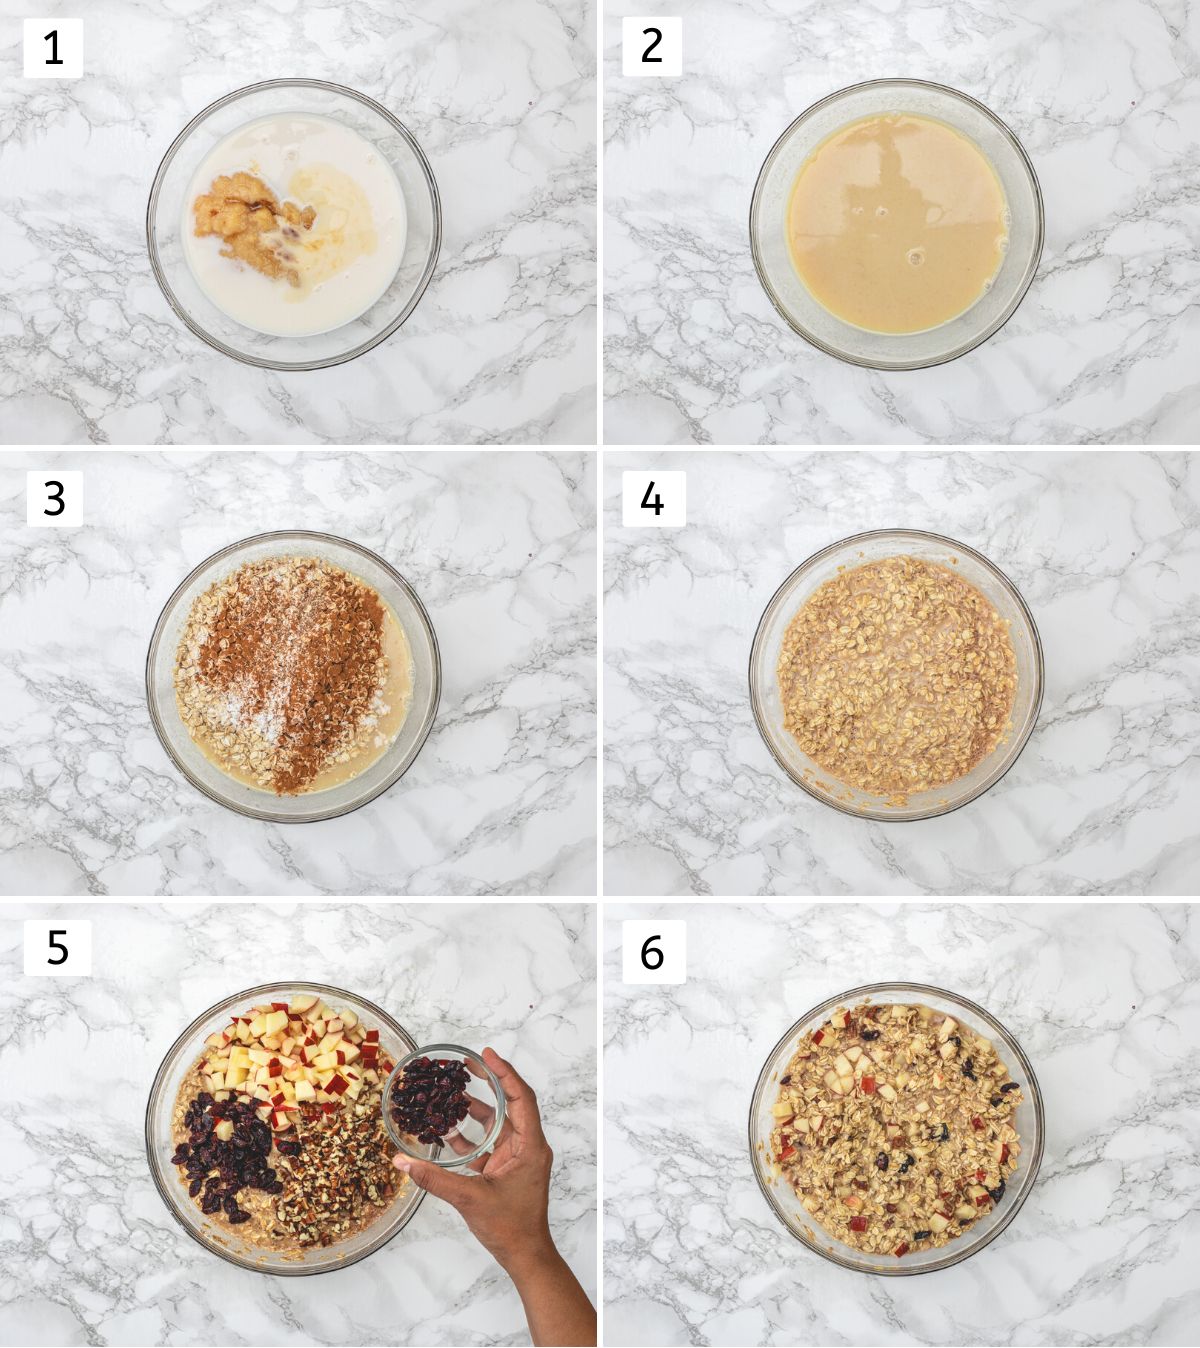 Collage of 6 images showing mixing wet ingredients, adding oats and rest ingredients.